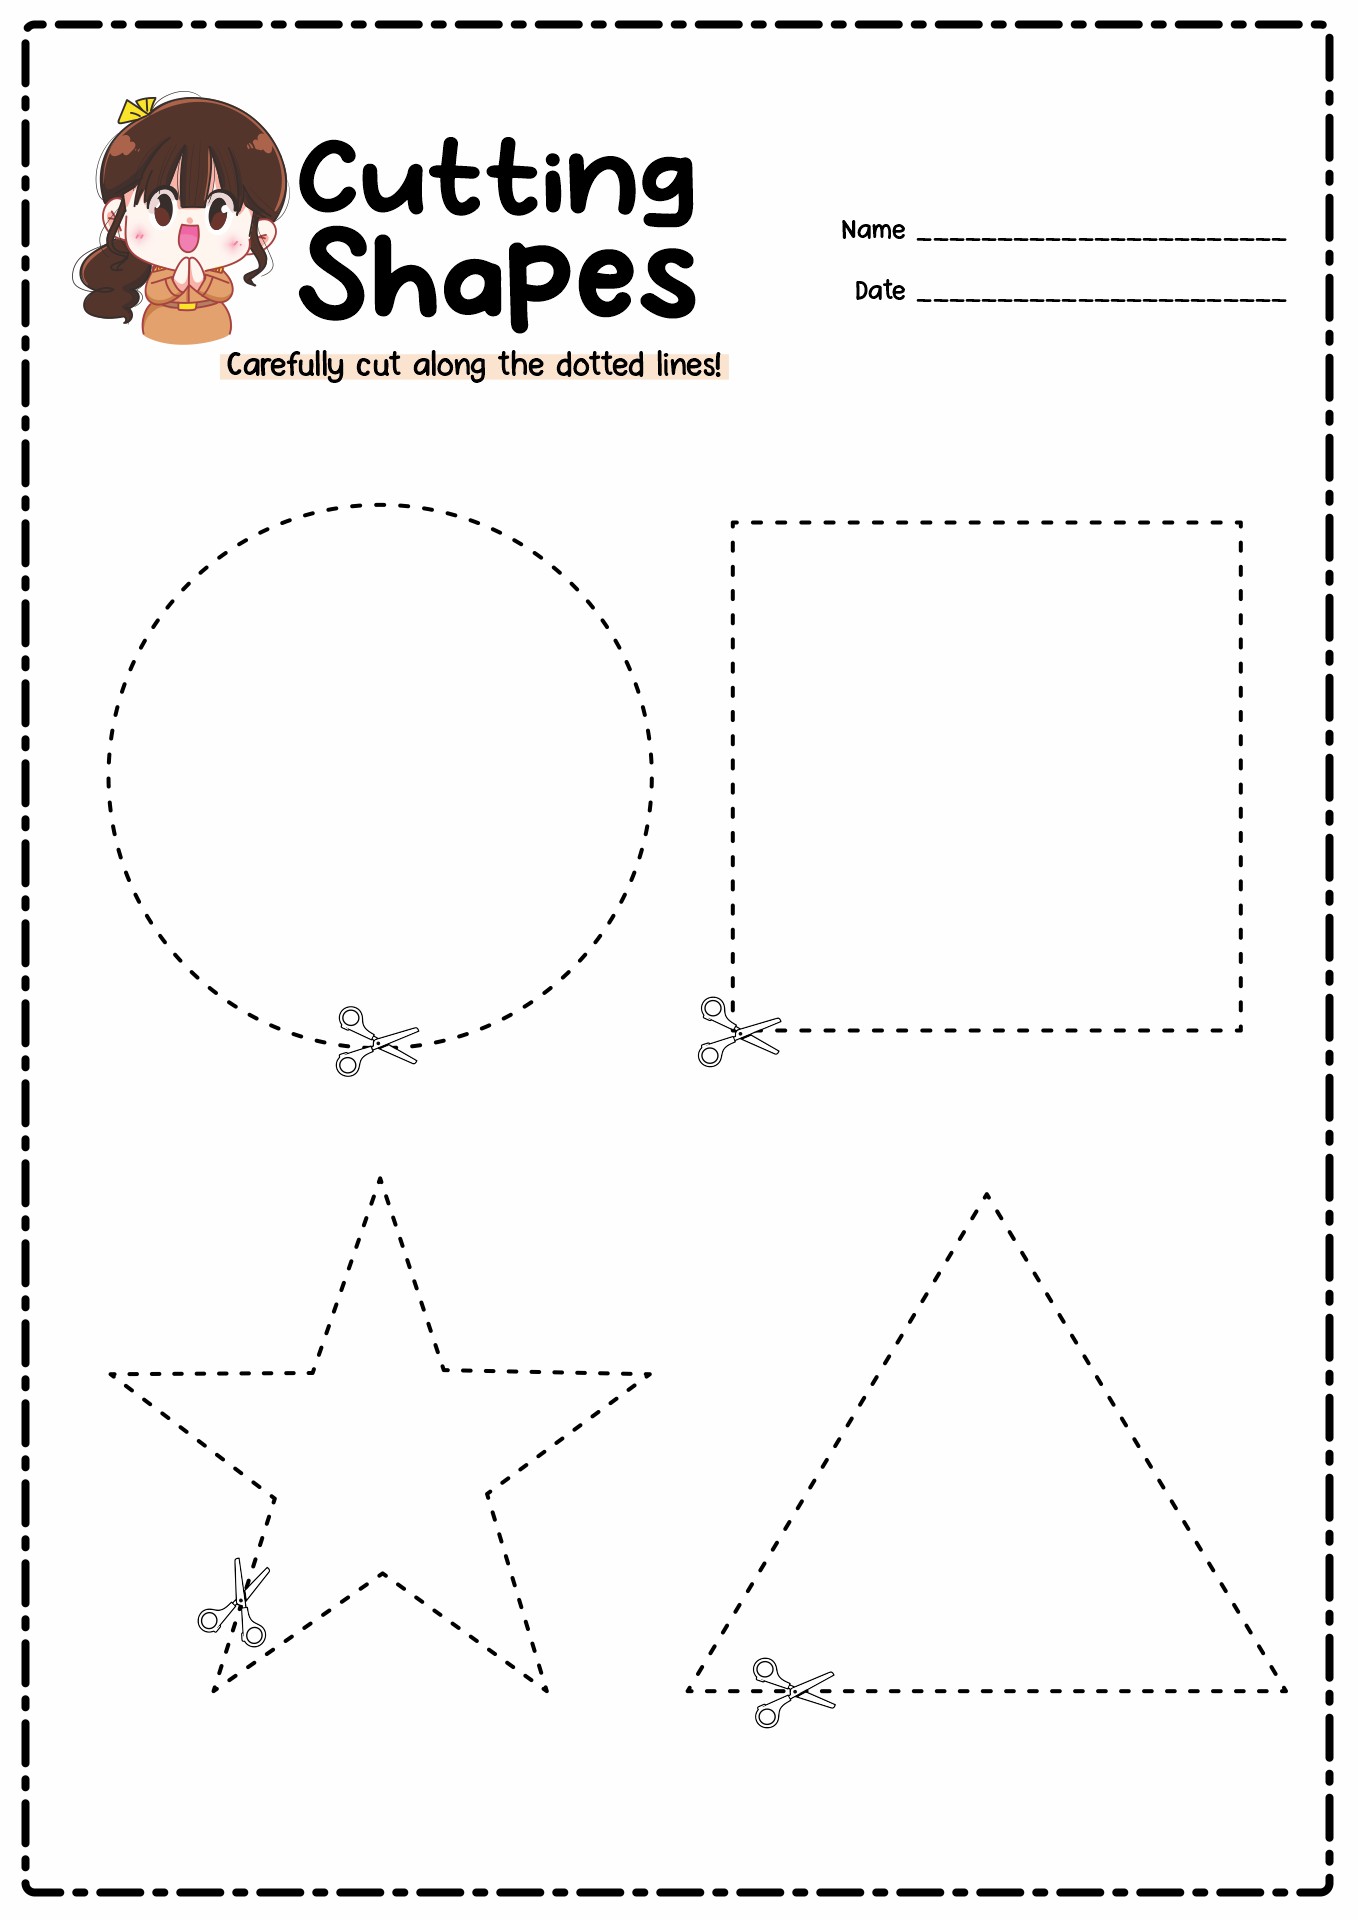 cutting-activities-for-kindergarten-free-printable-pdf-free-cutting